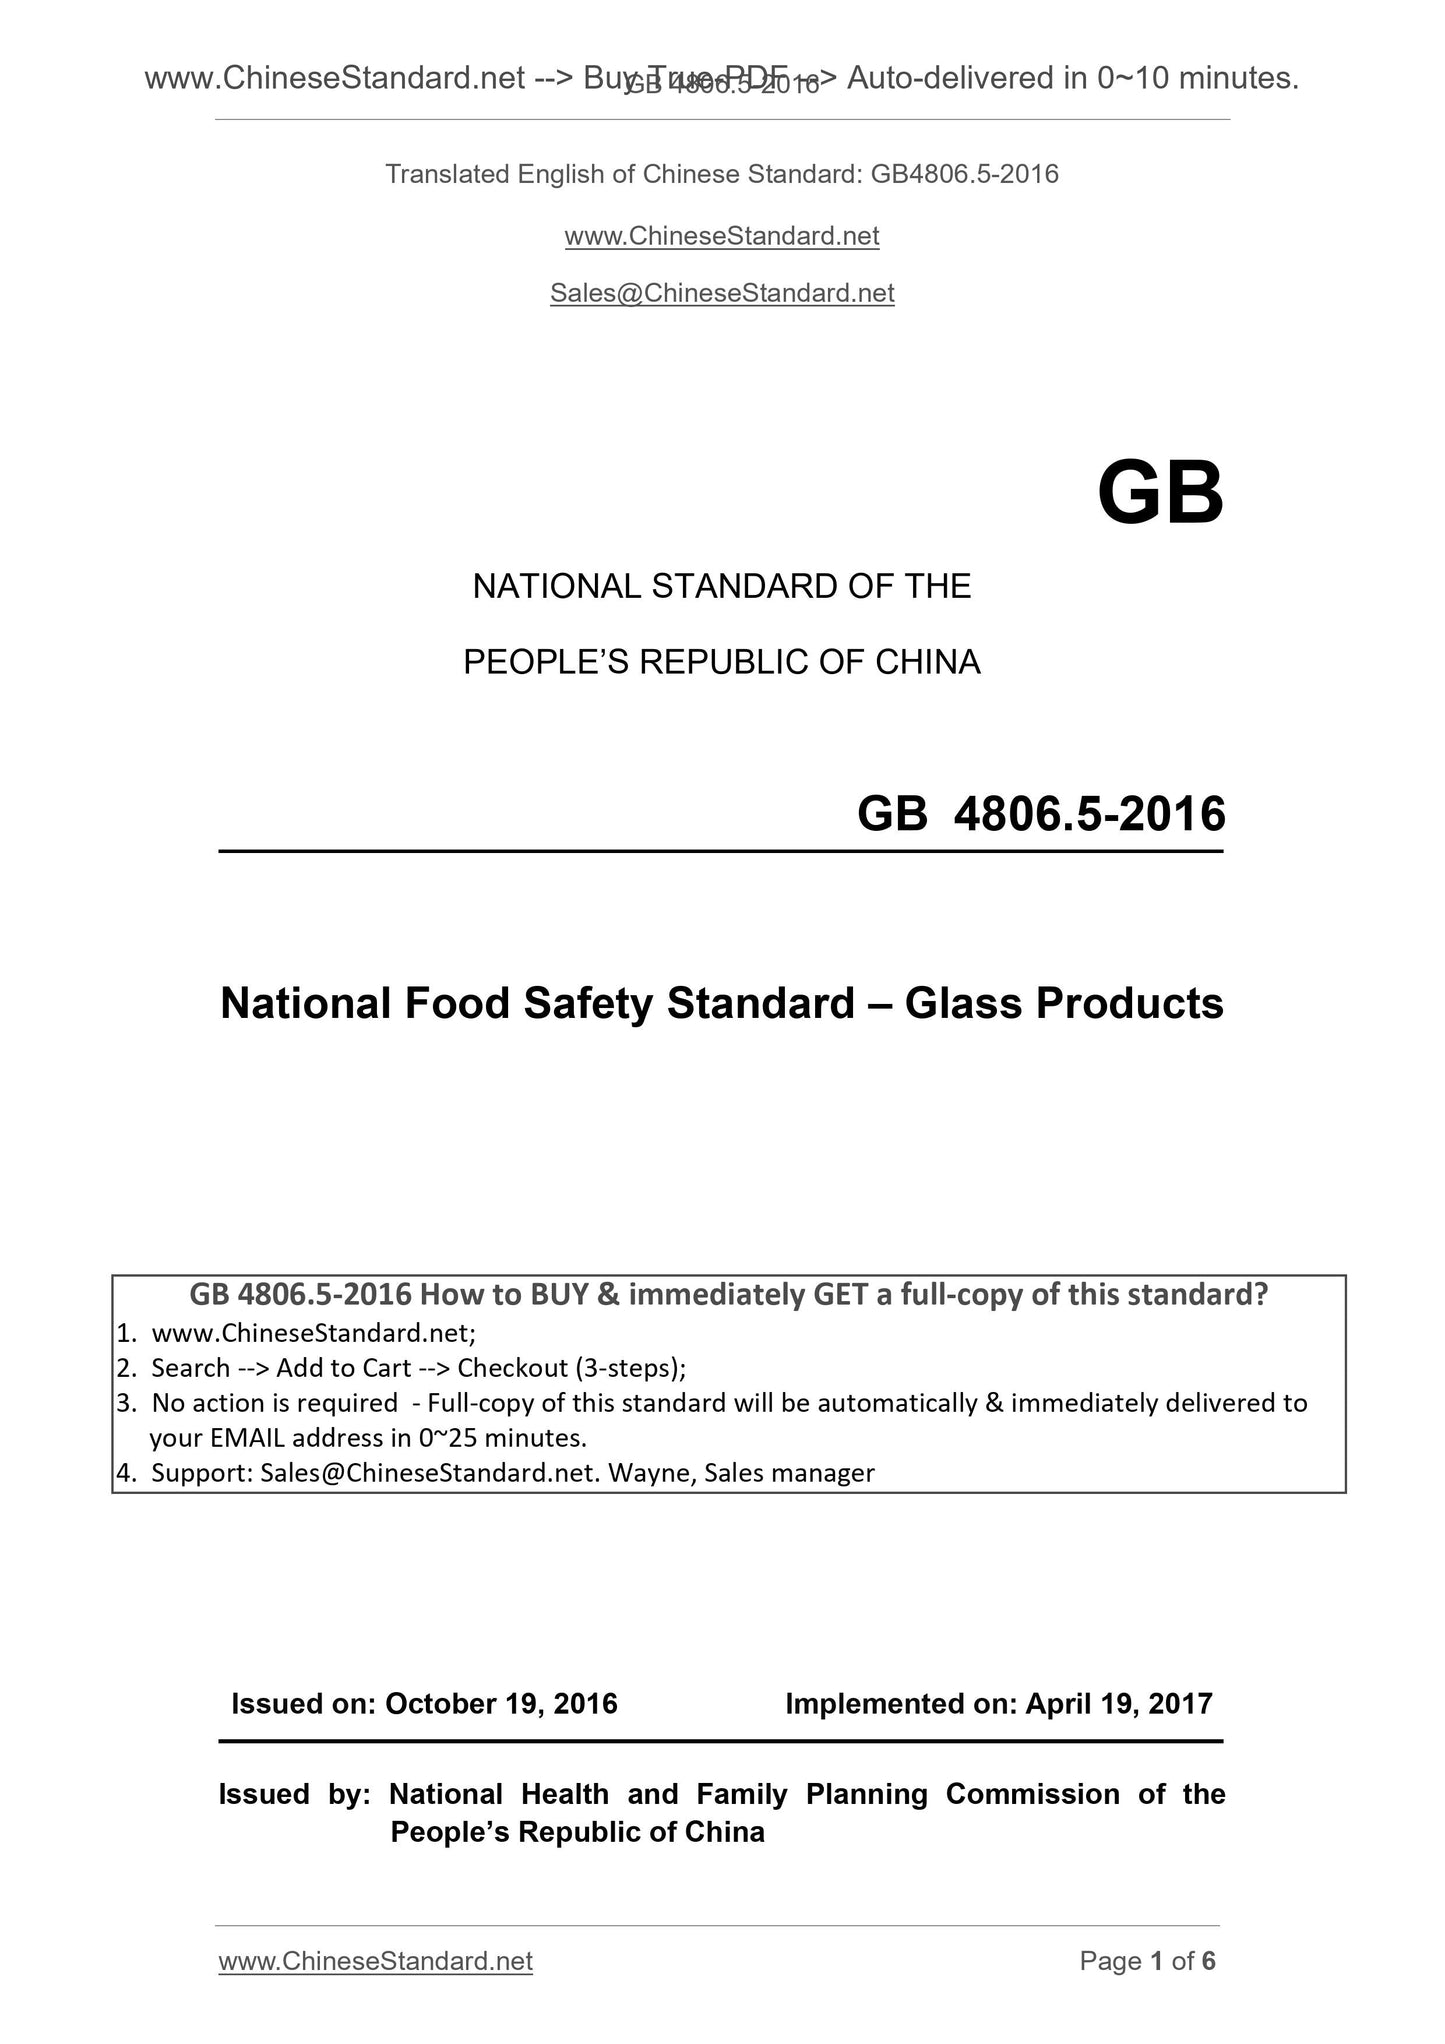 GB 4806.5-2016 Page 1